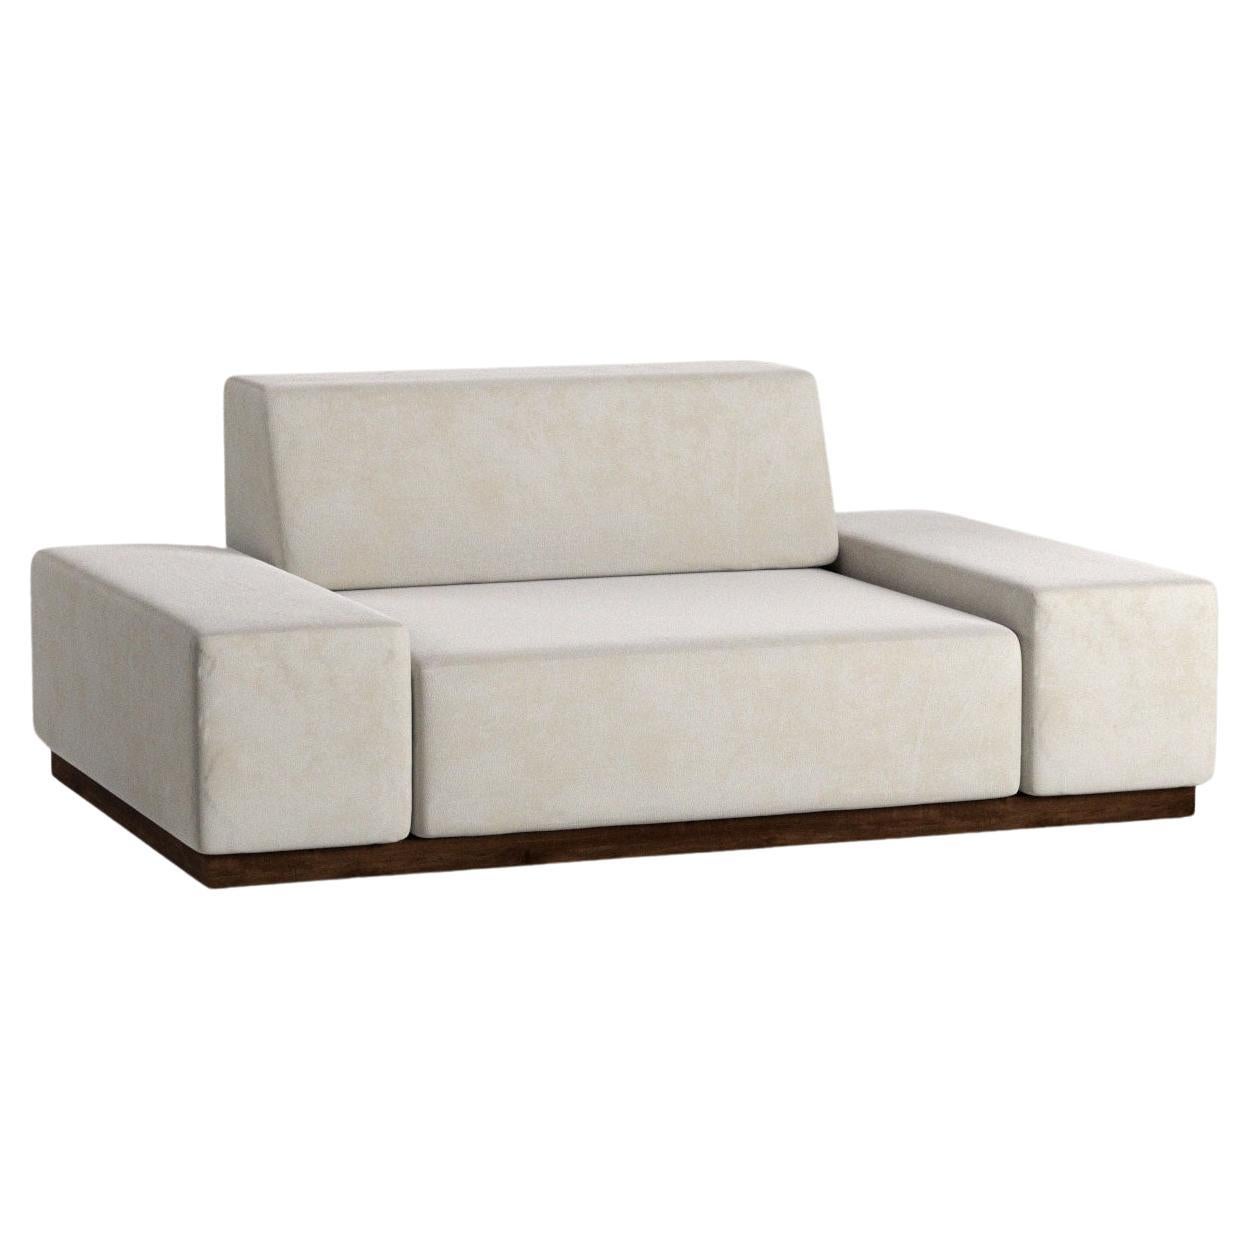 White One Seater Nube Sofa by Siete Studio For Sale